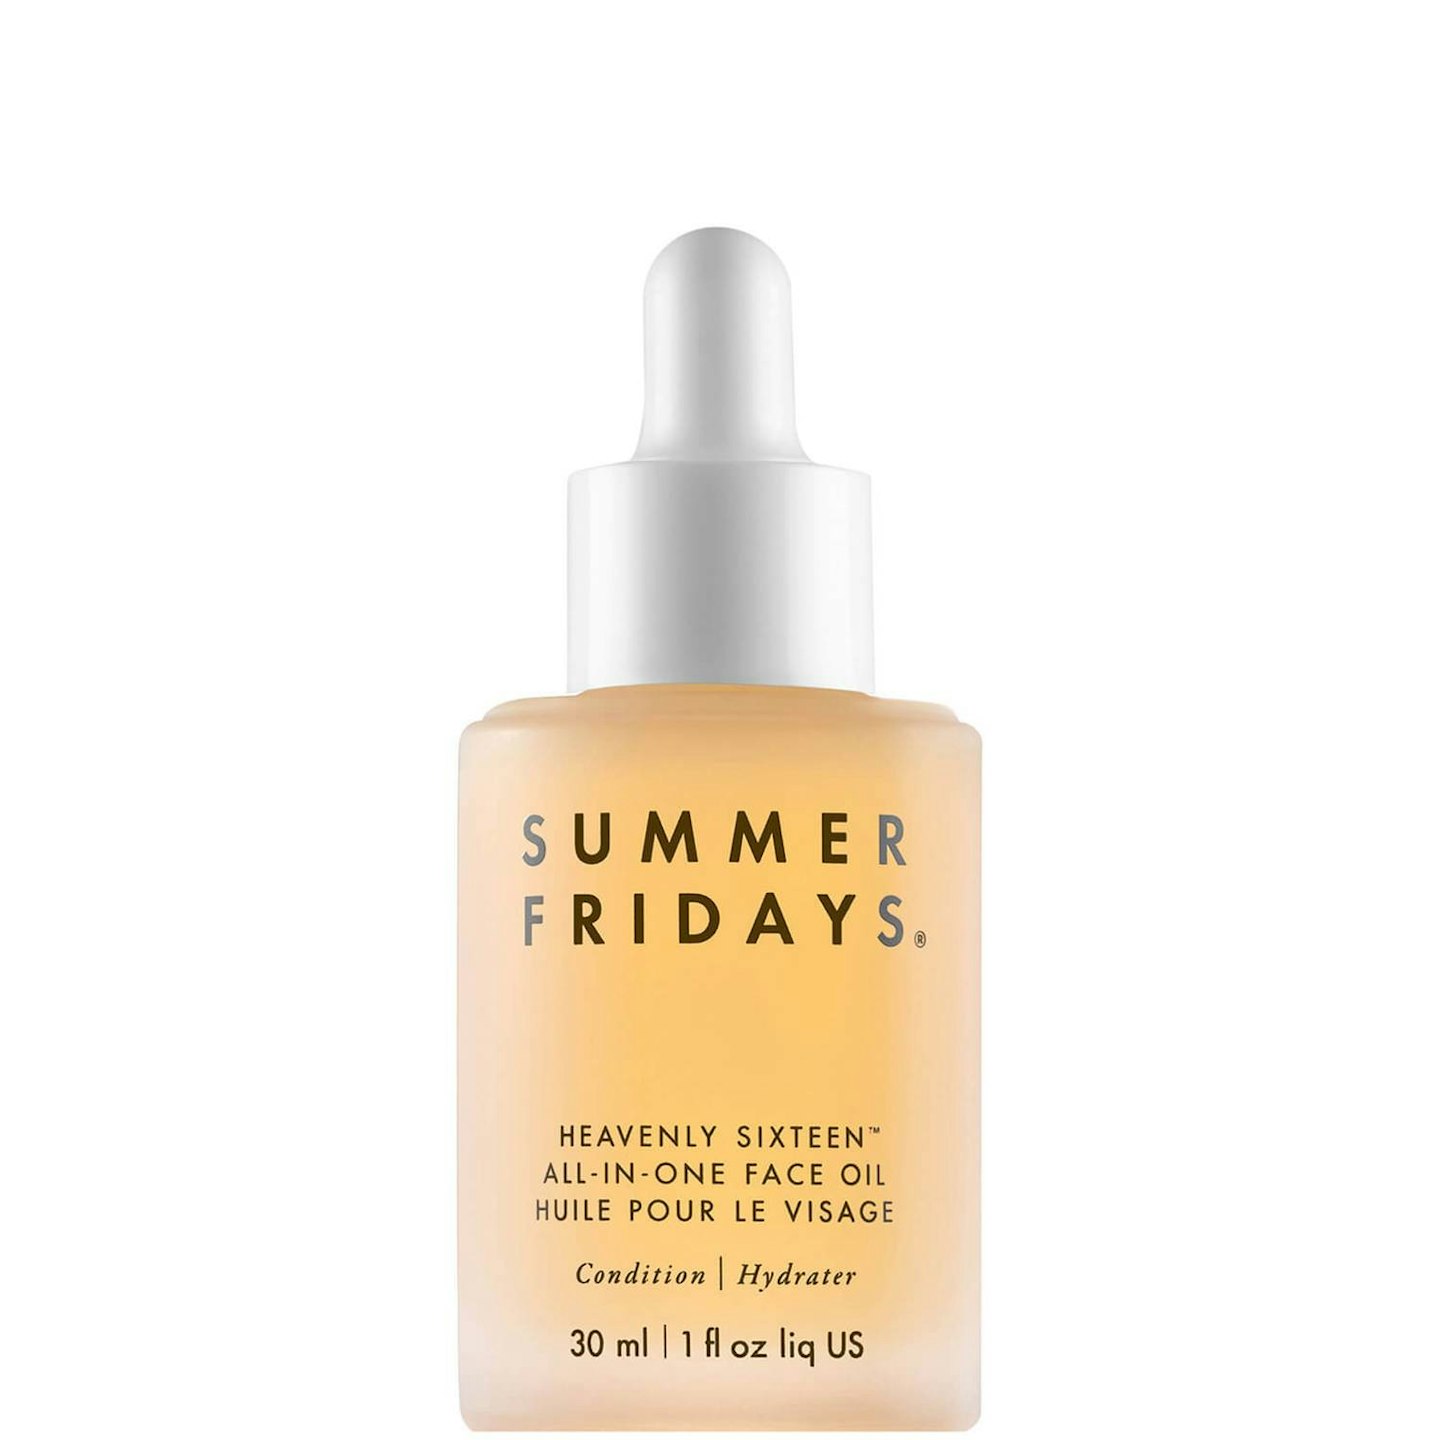 Summer Fridays Heavenly All-In-One Face Oil